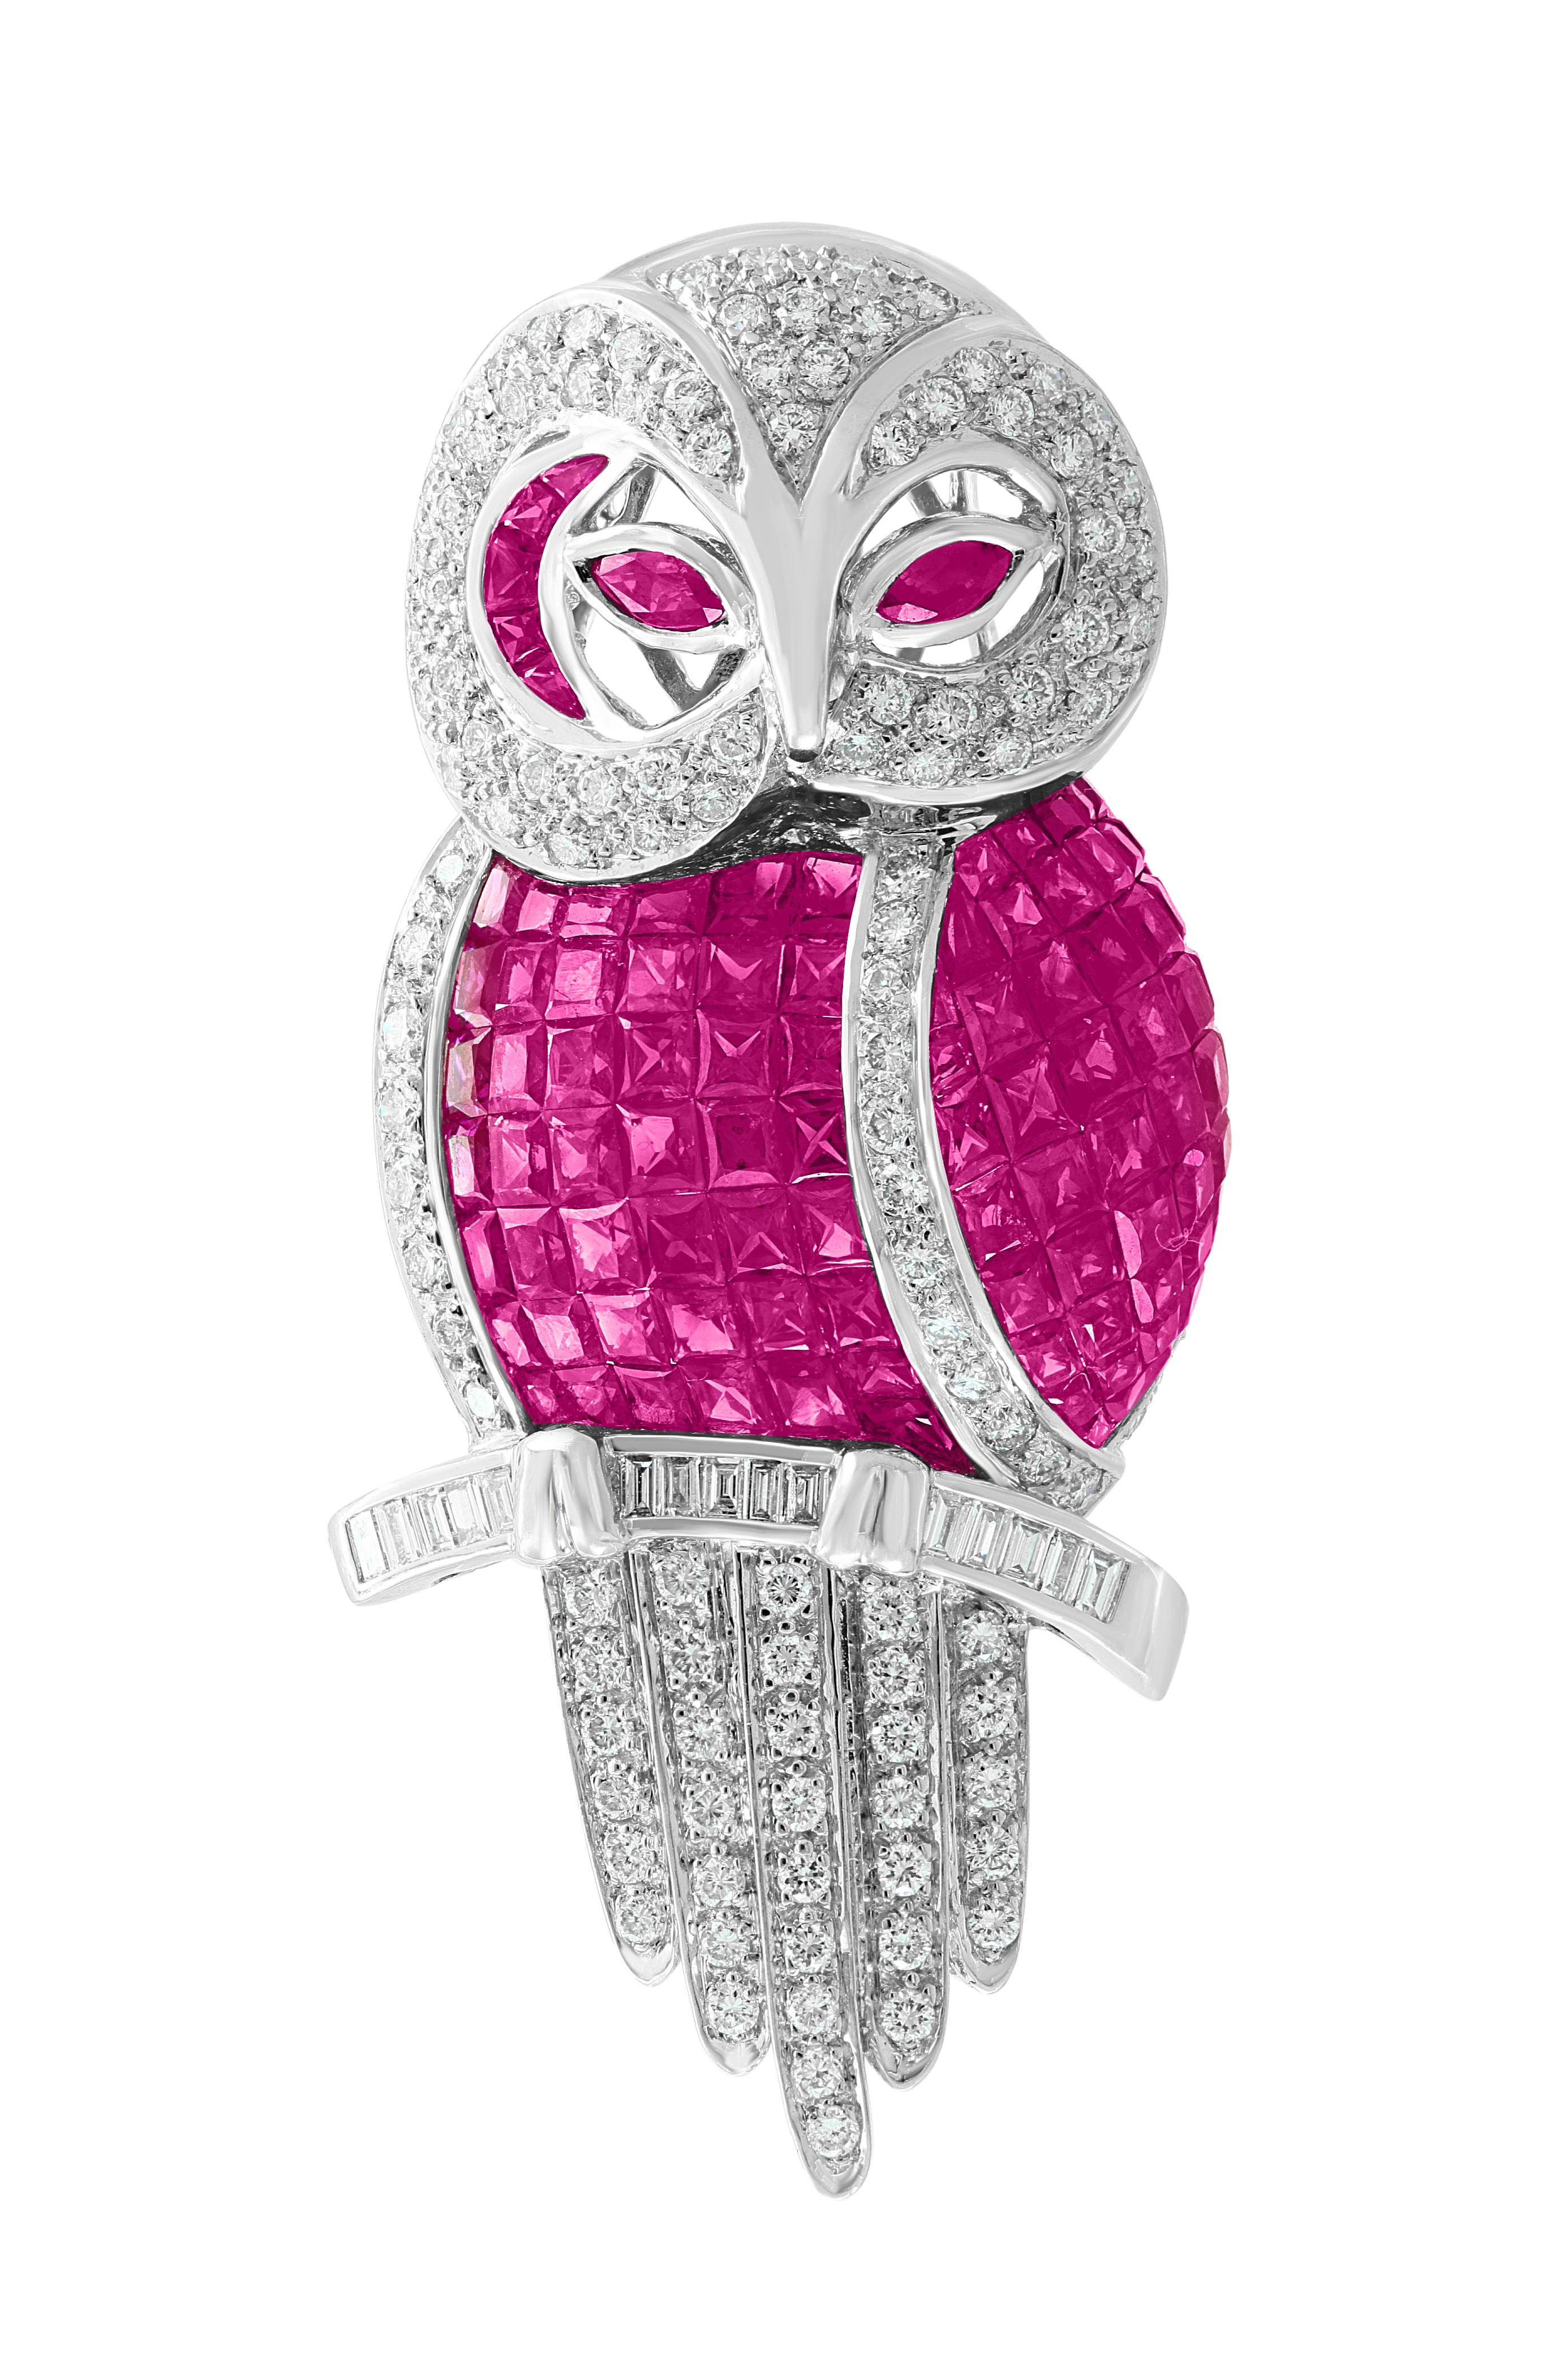 Invisible Mystery Set Ruby and Diamond Owl Pin or Pendant 18 Karat White Gold 1